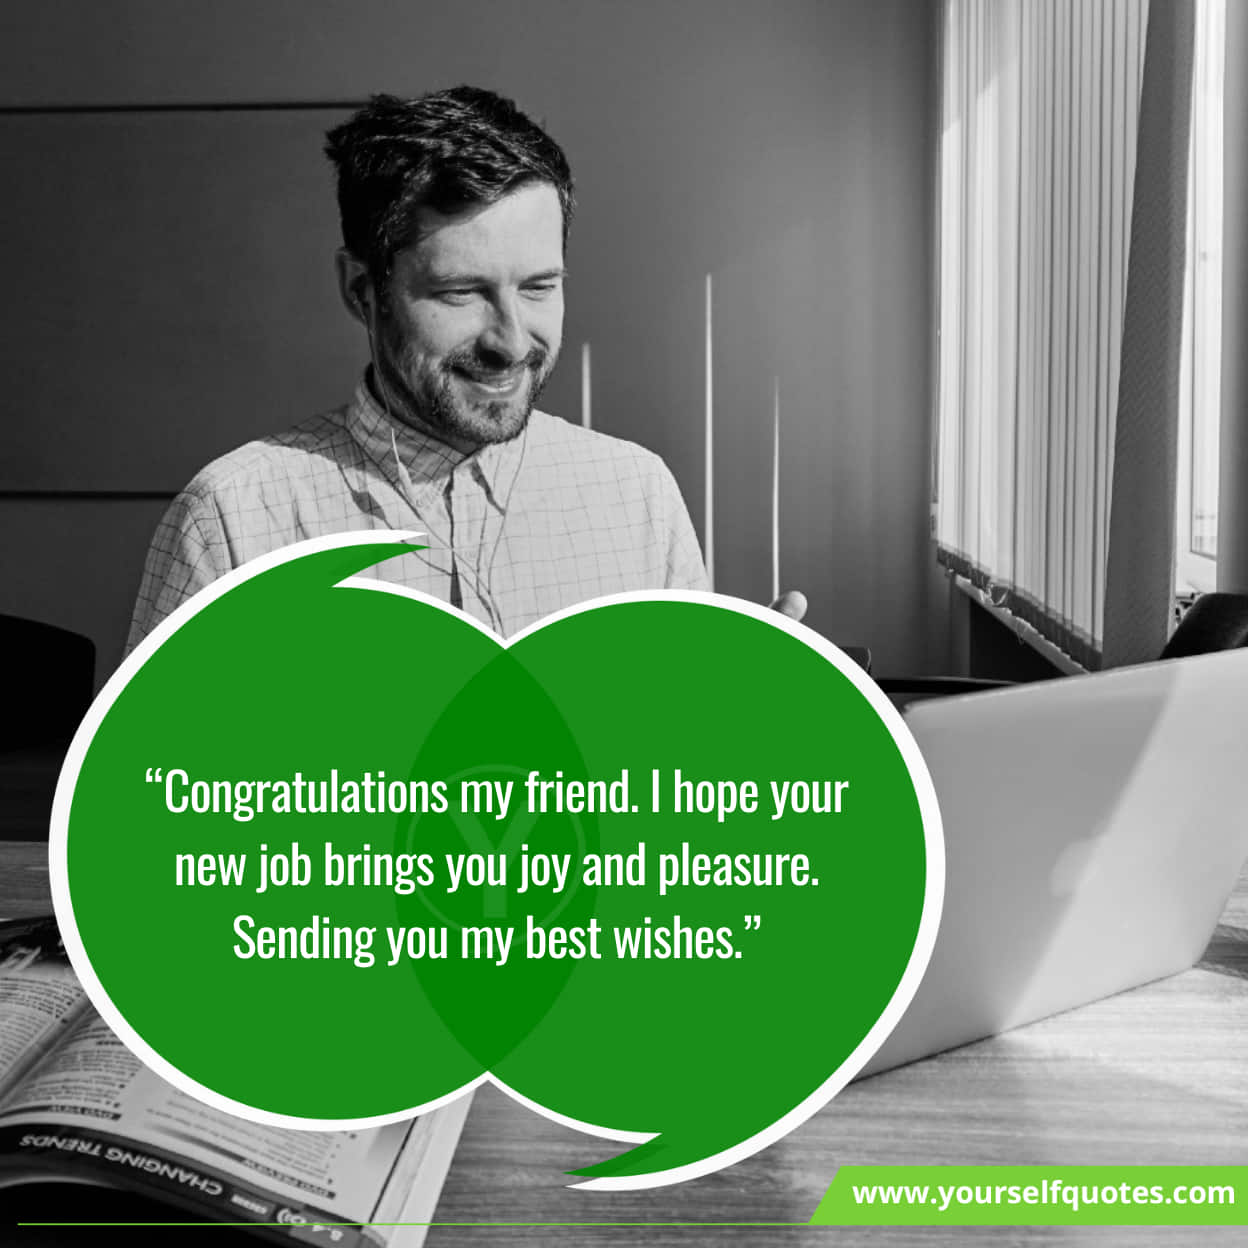 Wishes To Congratulate Friend On New Job